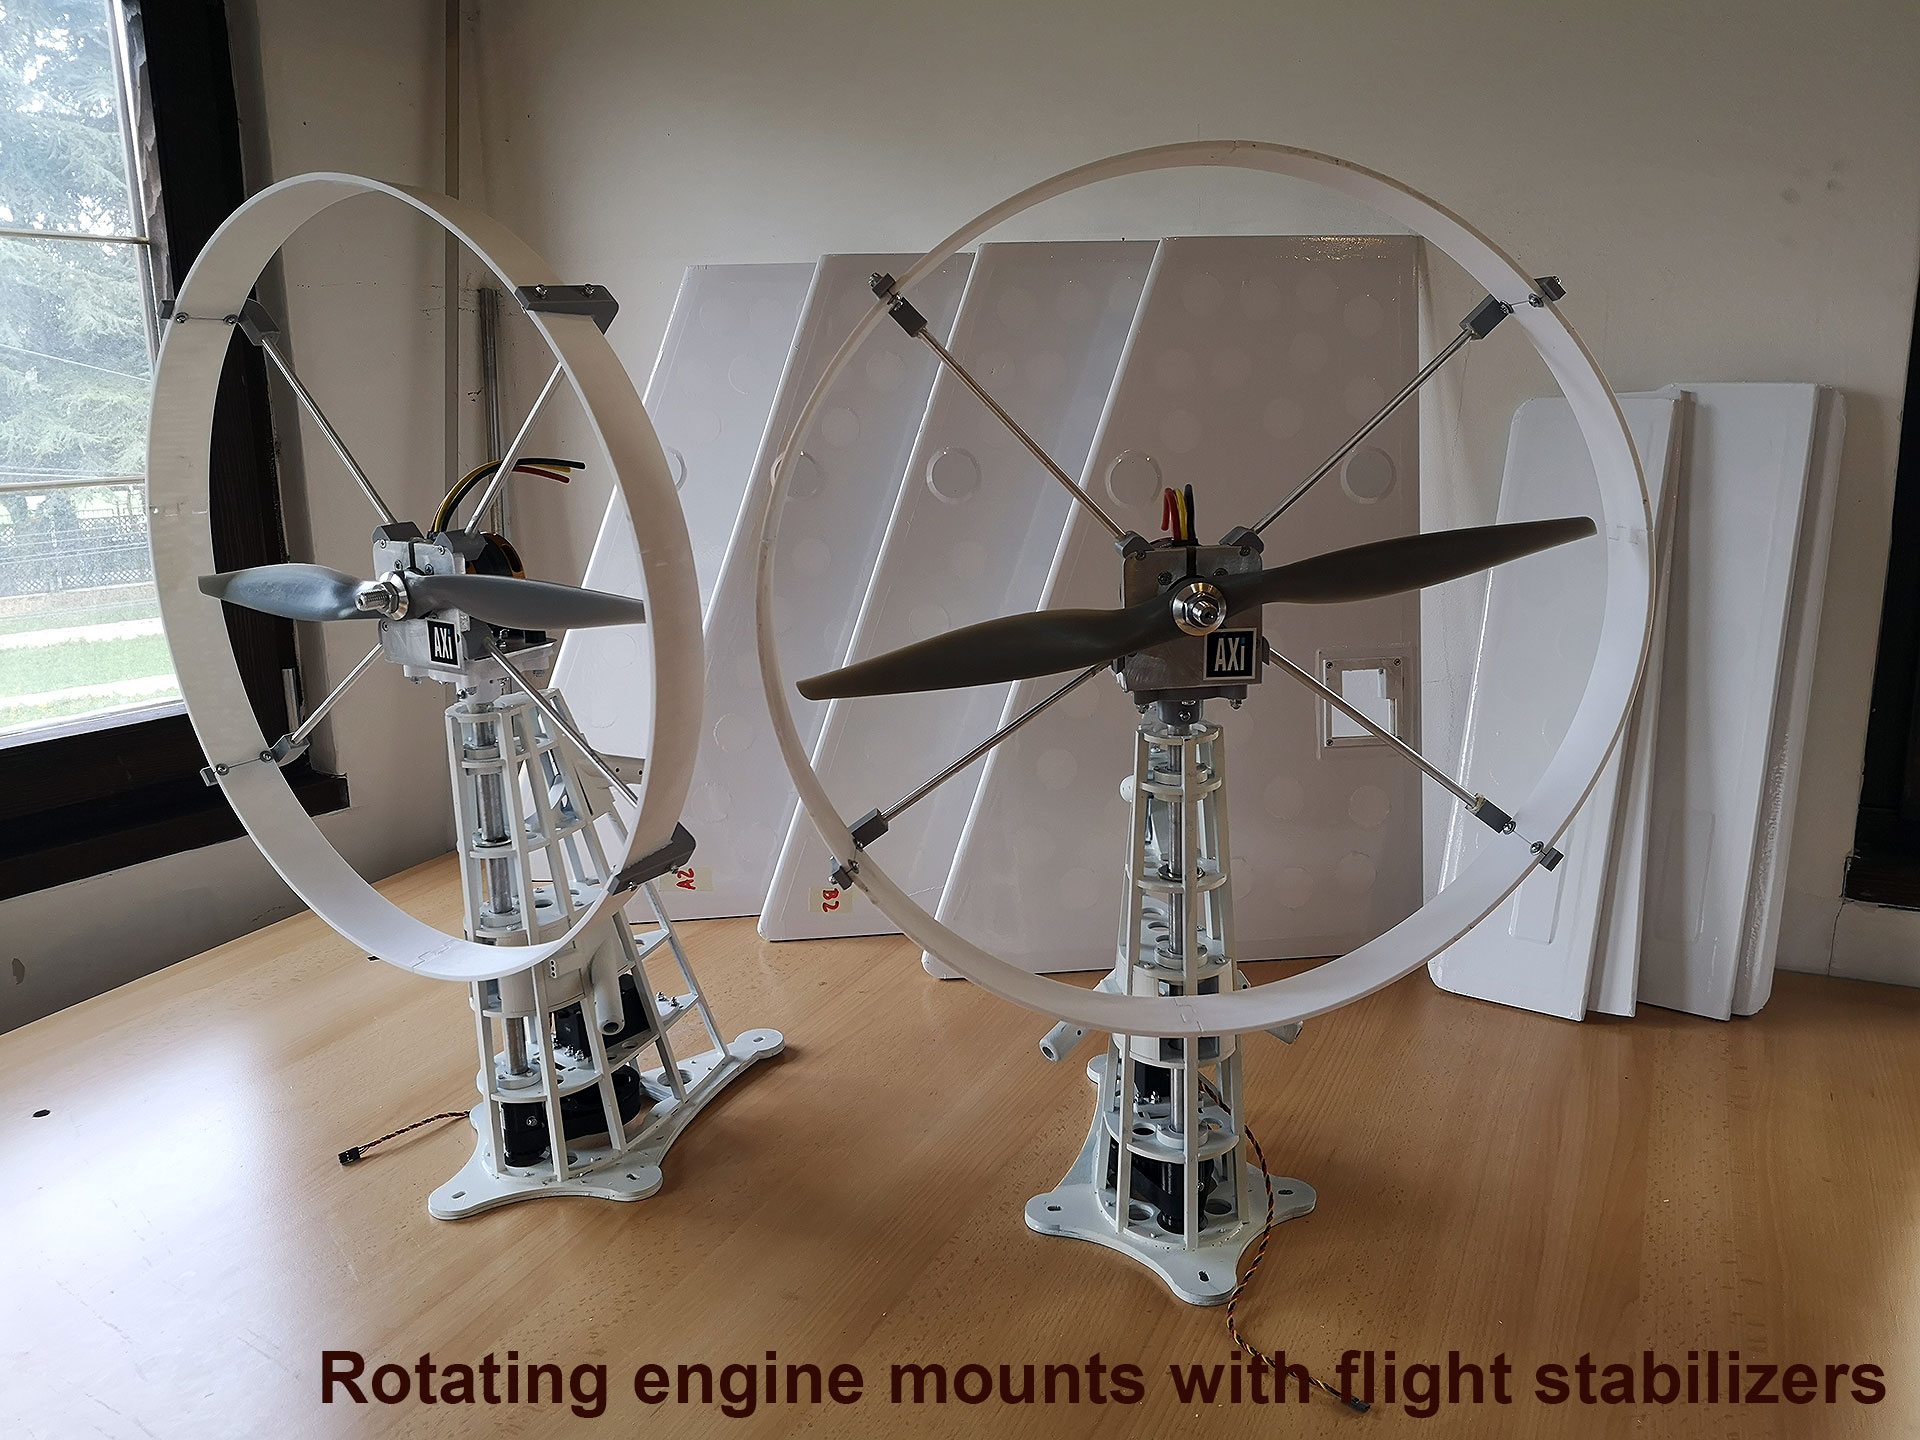 Rotating-engine-mounts-with-flight-stabilizers